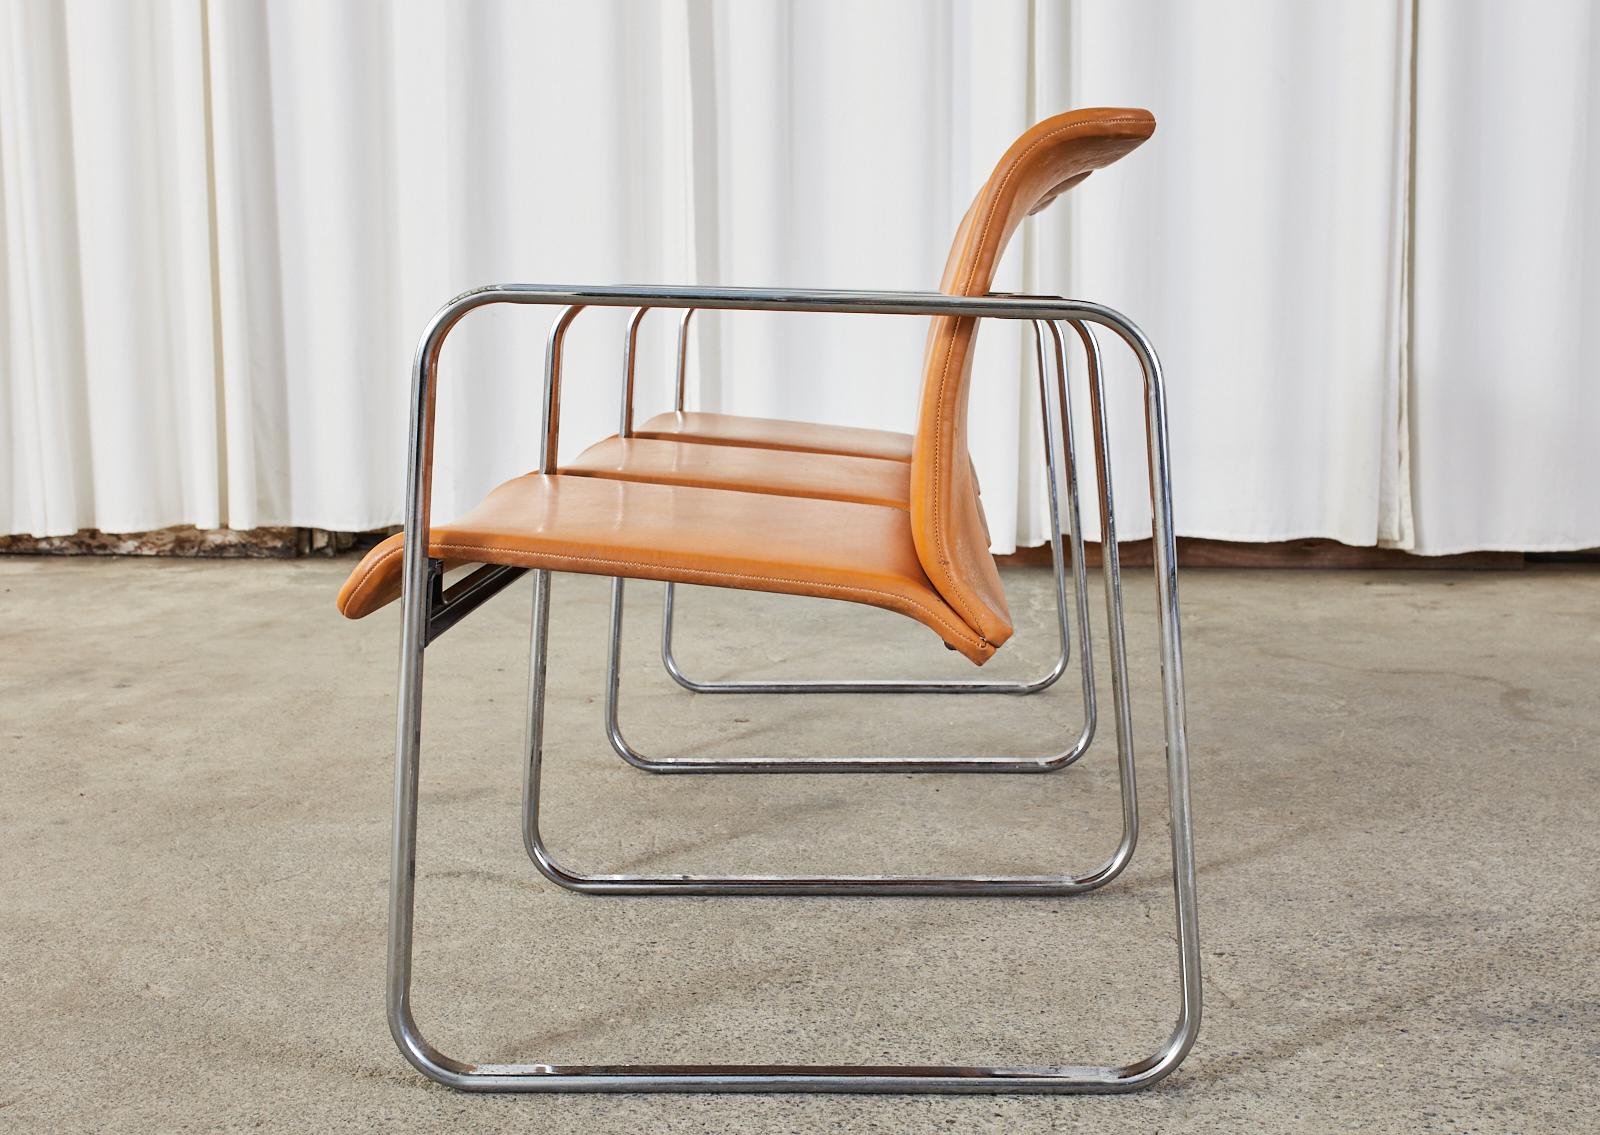 Midcentury Three Seat Tandem Chairs Peter Protzman Herman Miller In Good Condition For Sale In Rio Vista, CA